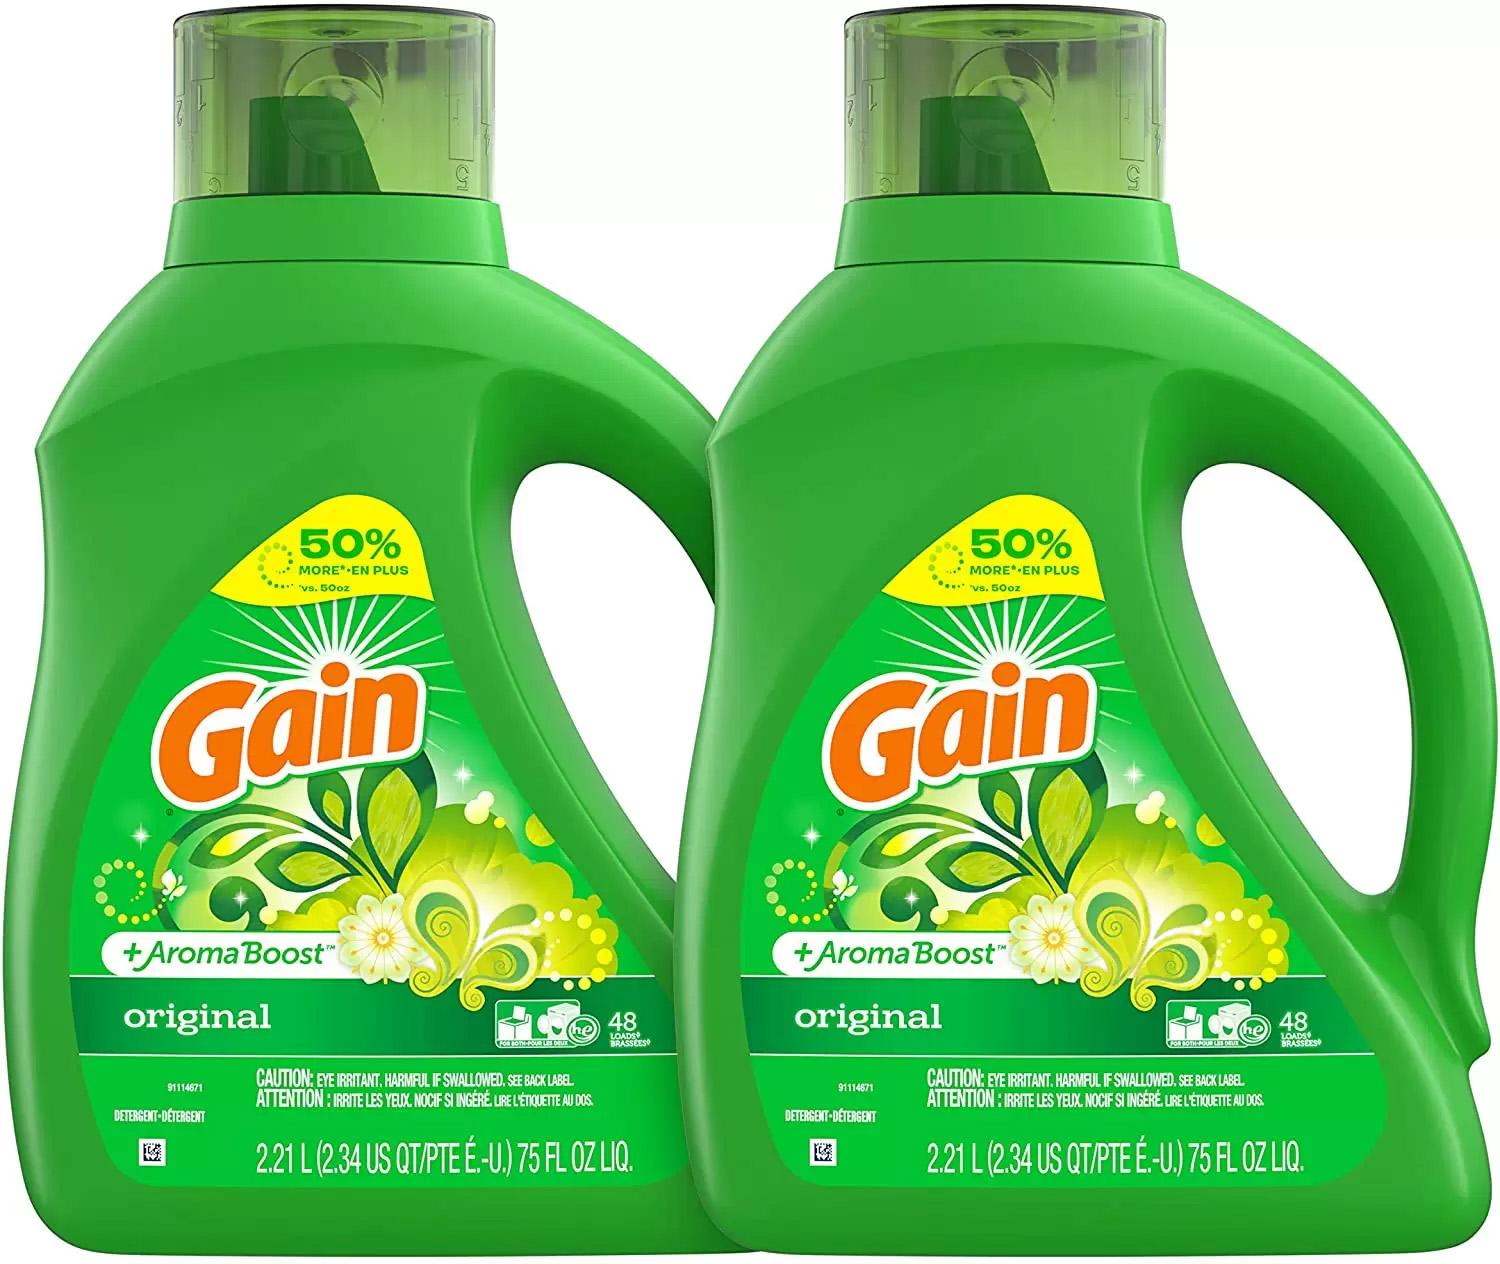 2 Gain Liquid Laundry Detergent Plus Aroma Boost for $11.08 Shipped